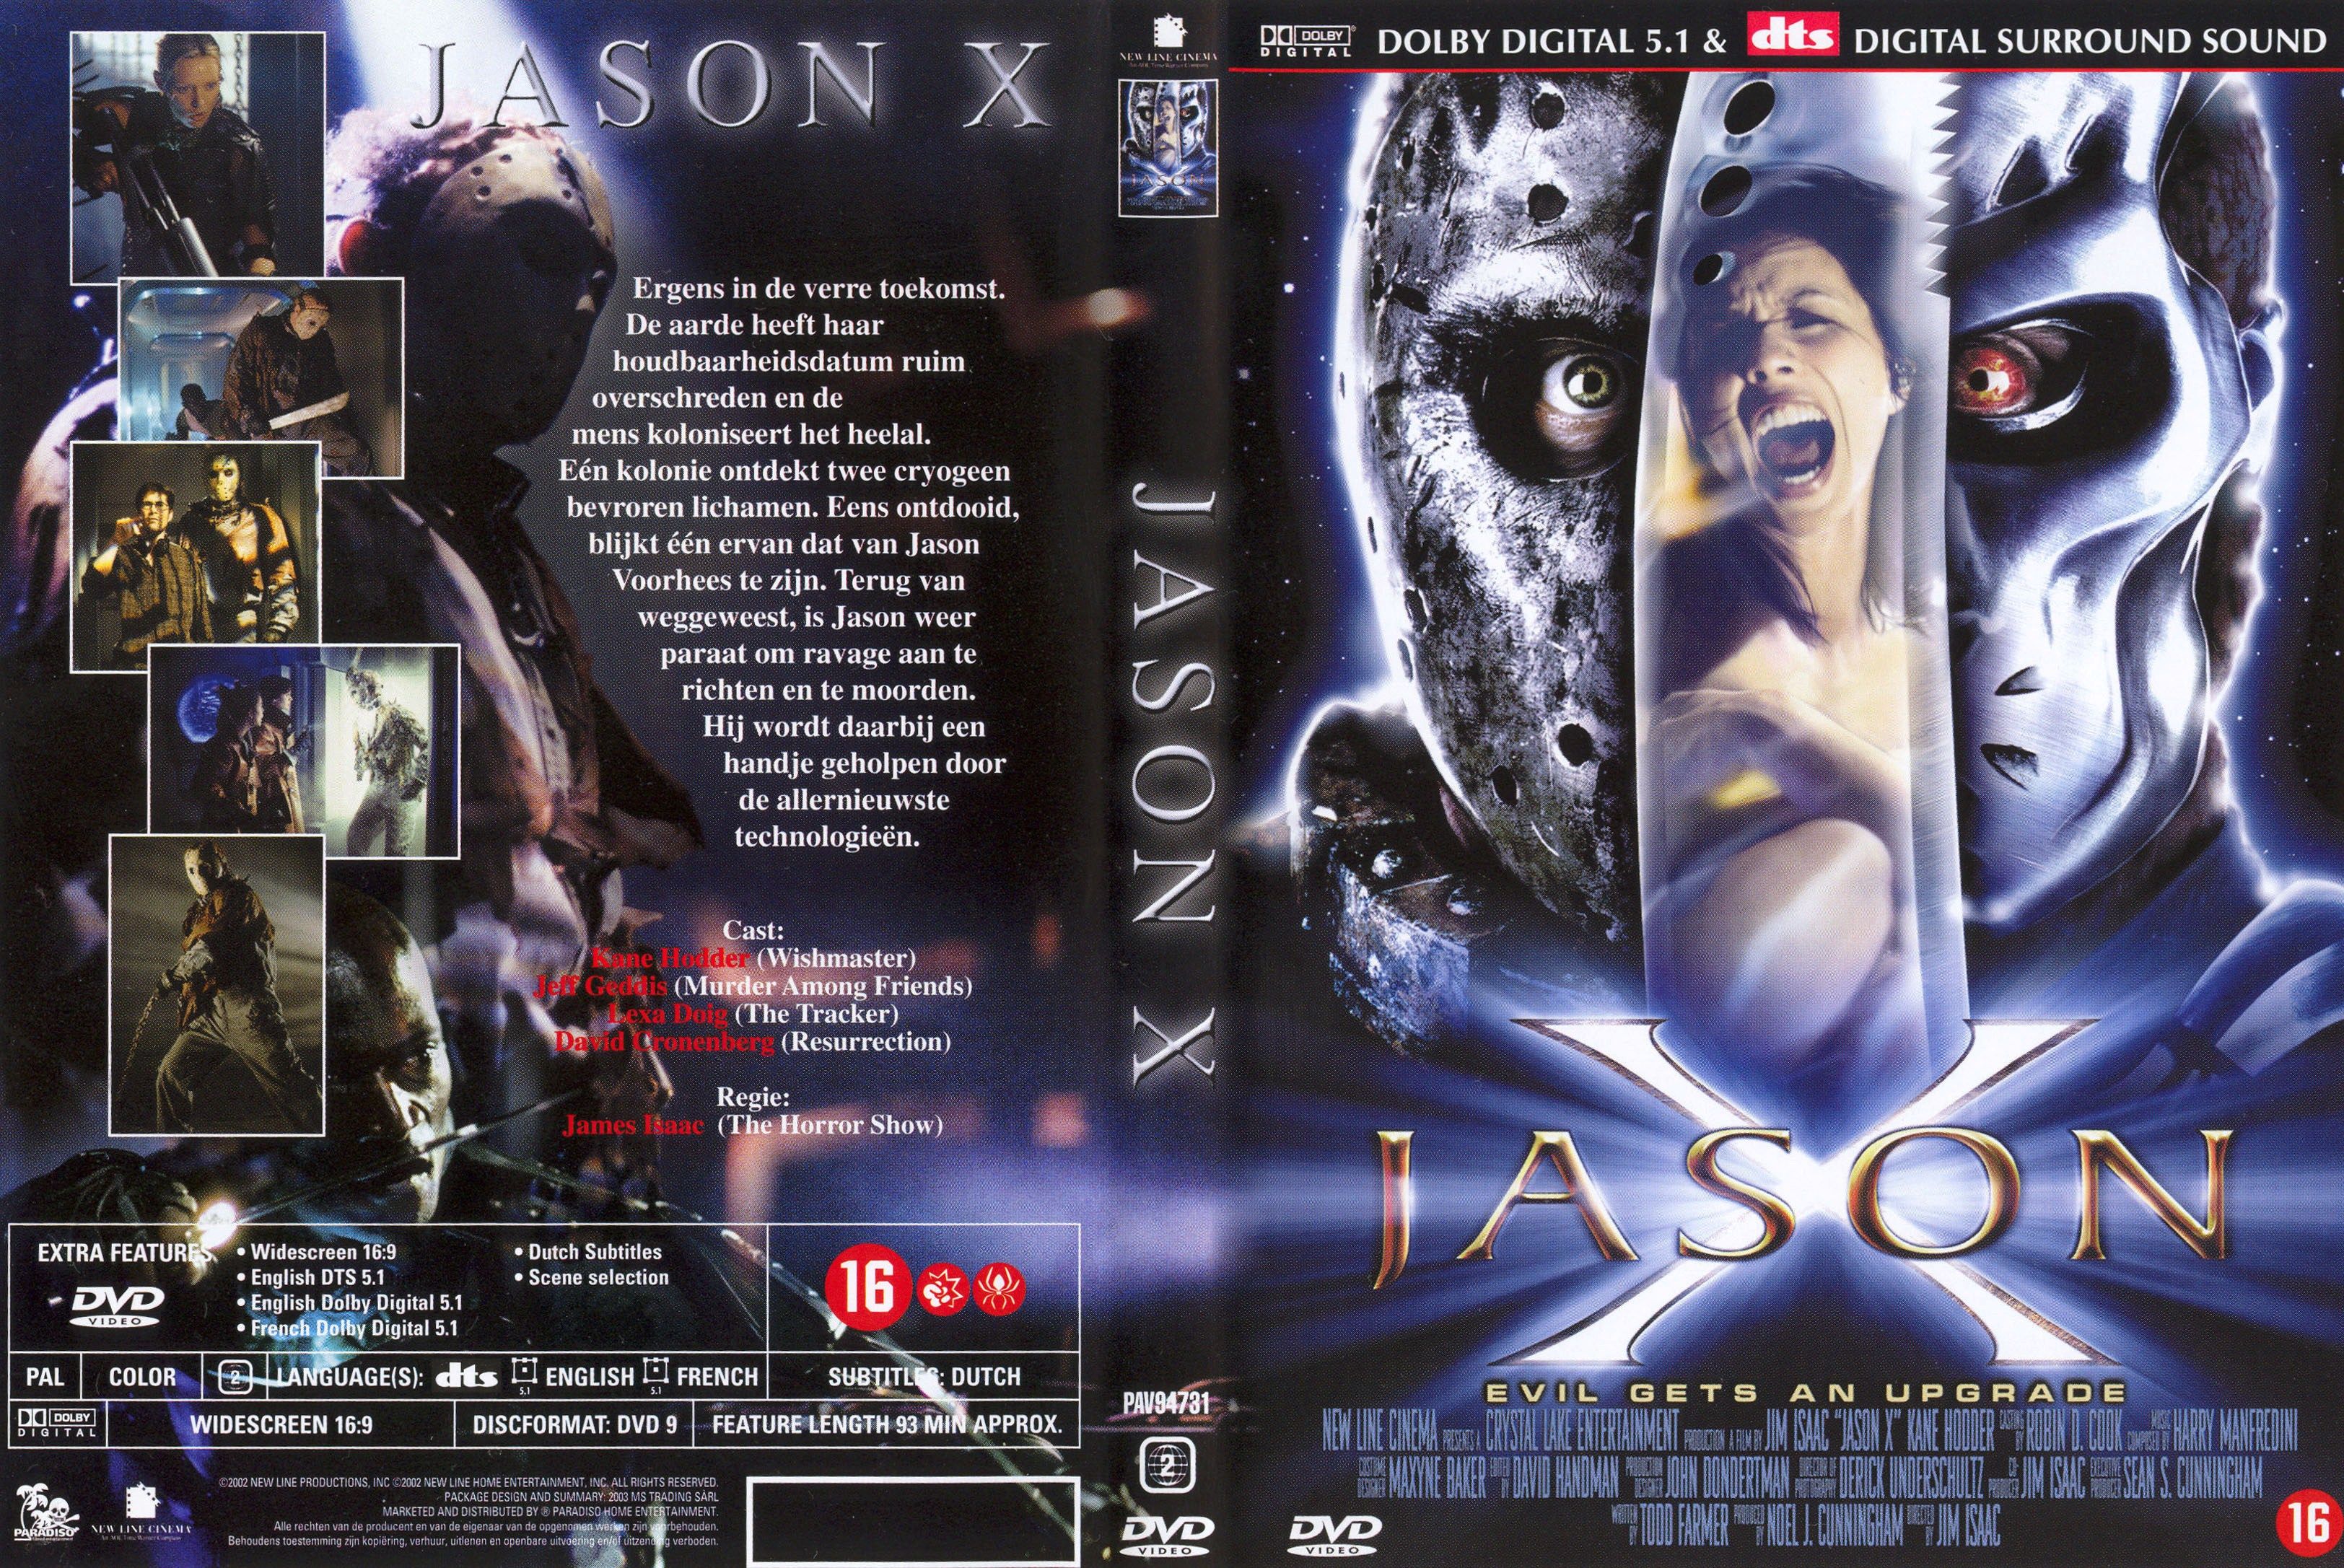 Jason X Dvd Misc Dvd Dvd Covers Cover Century Over 500 000 Album Art Covers For Free